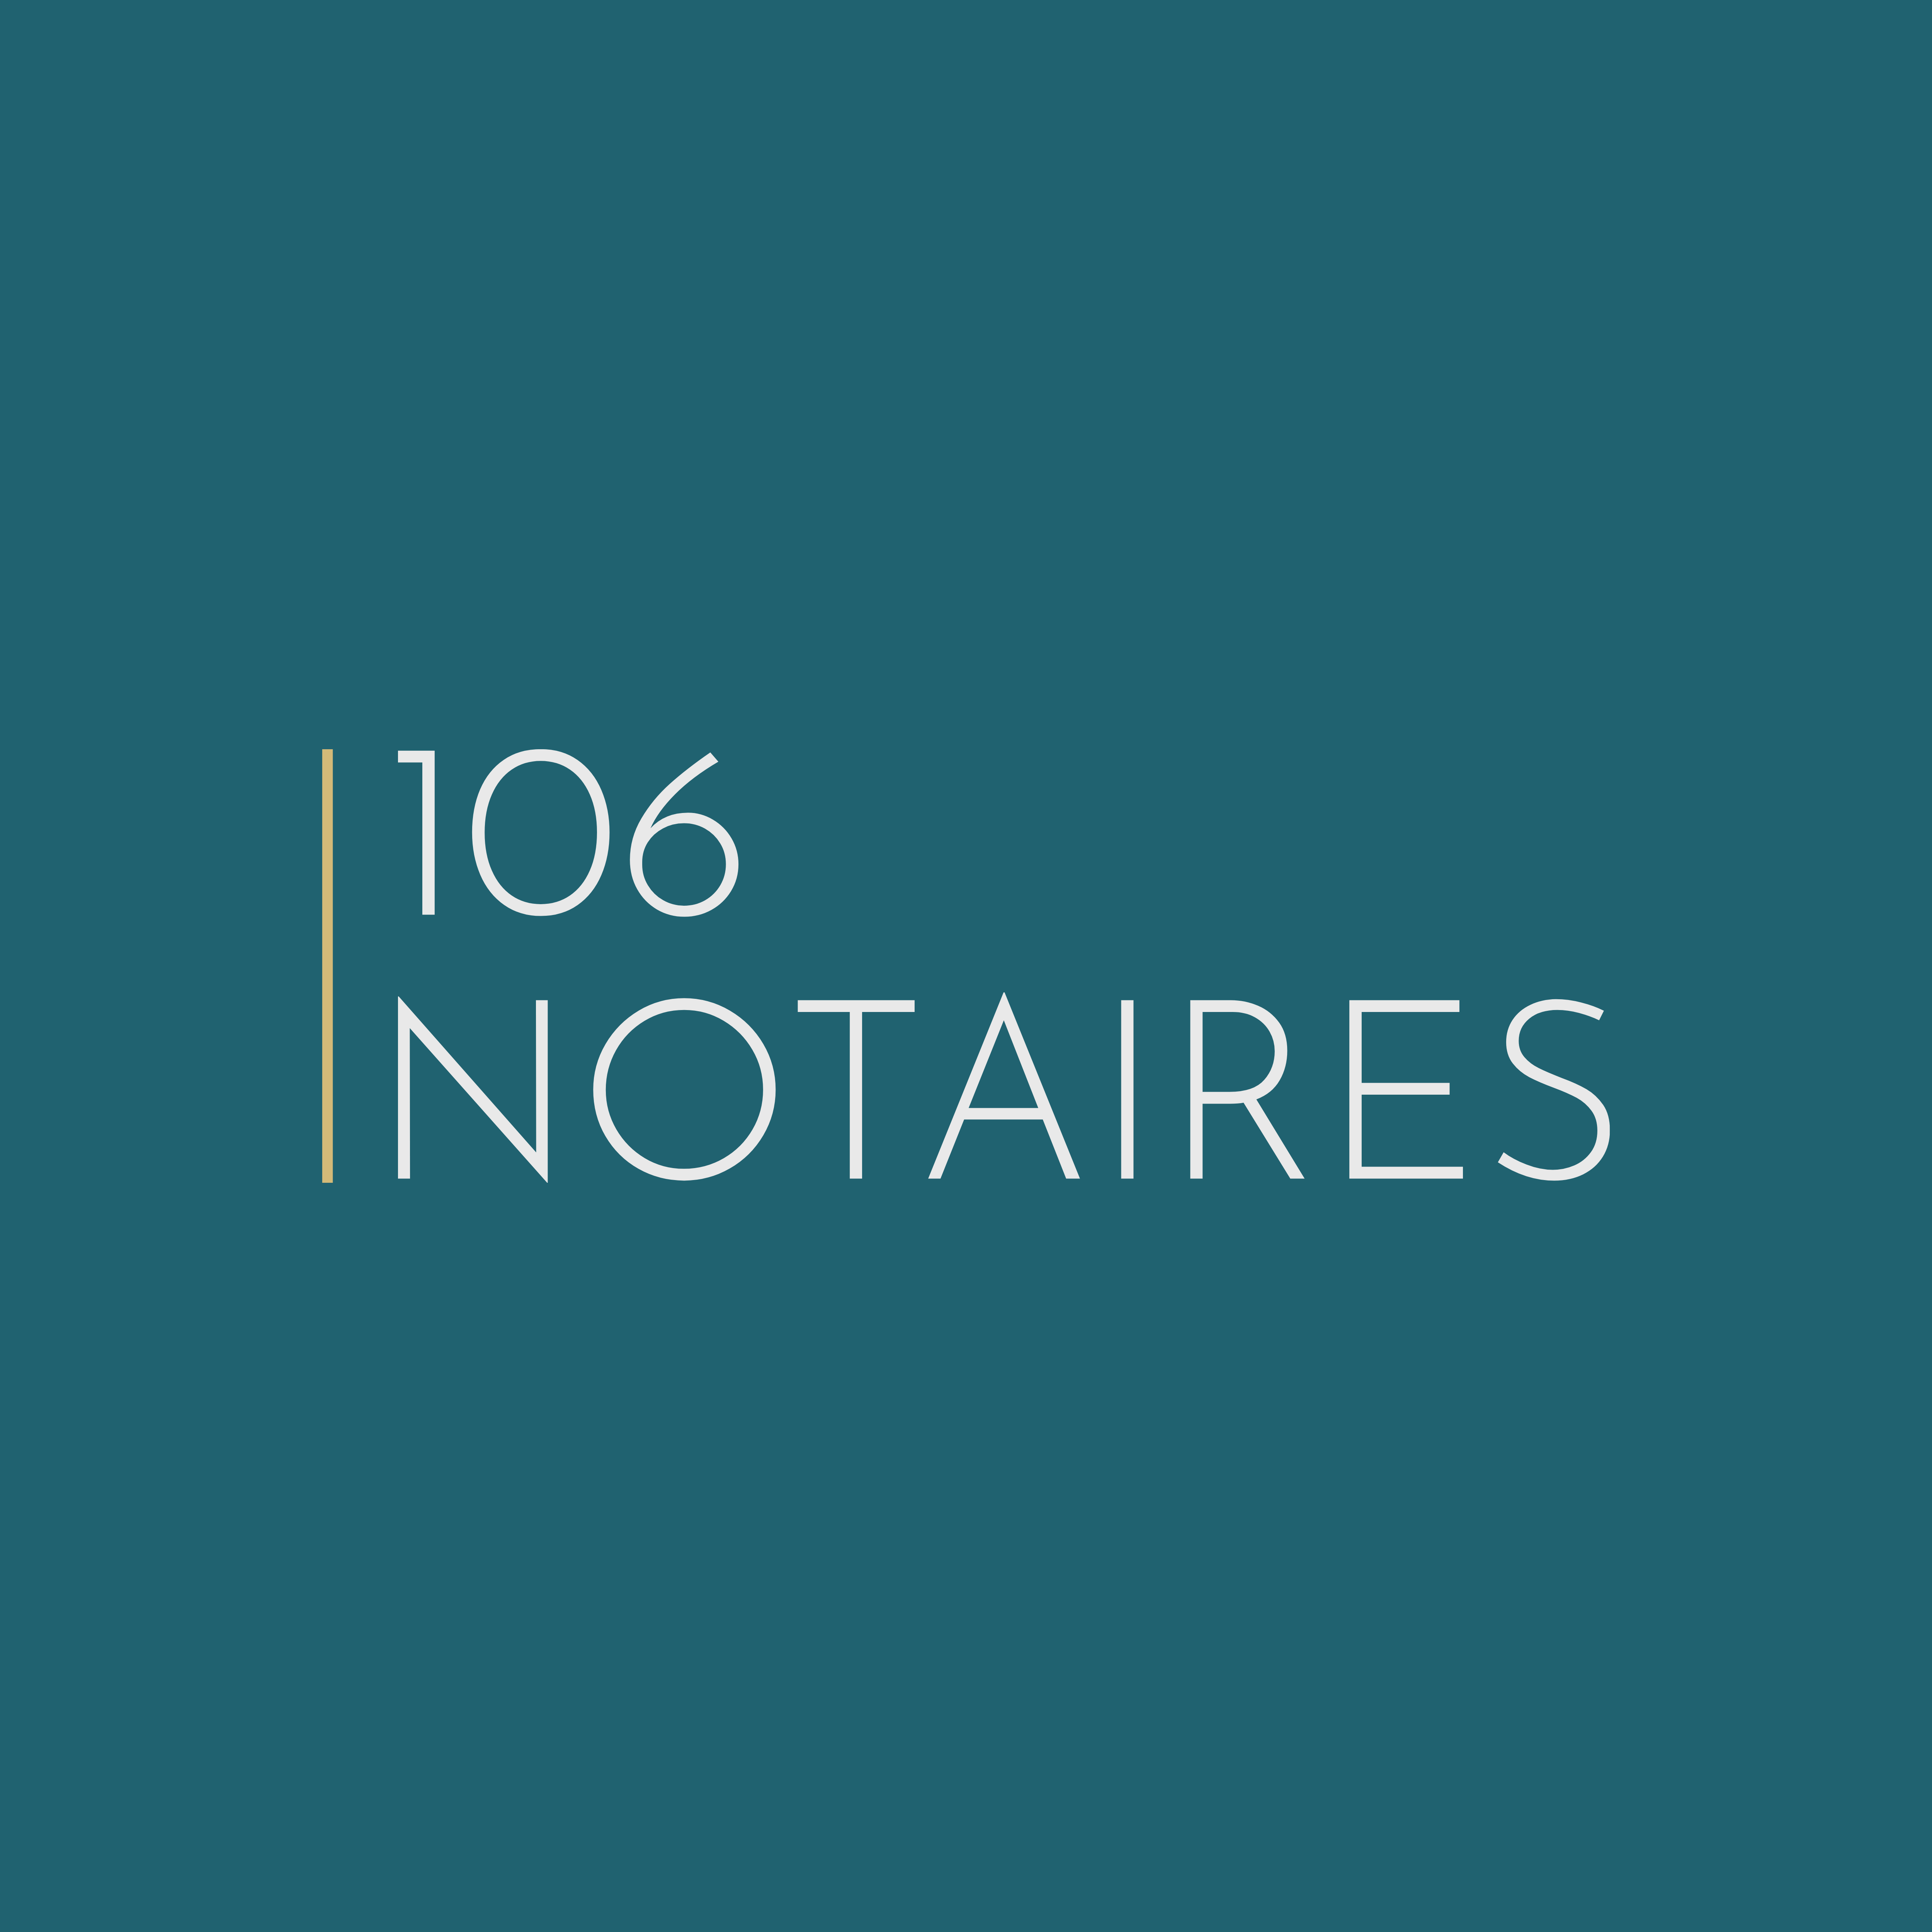 106 NOTAIRES